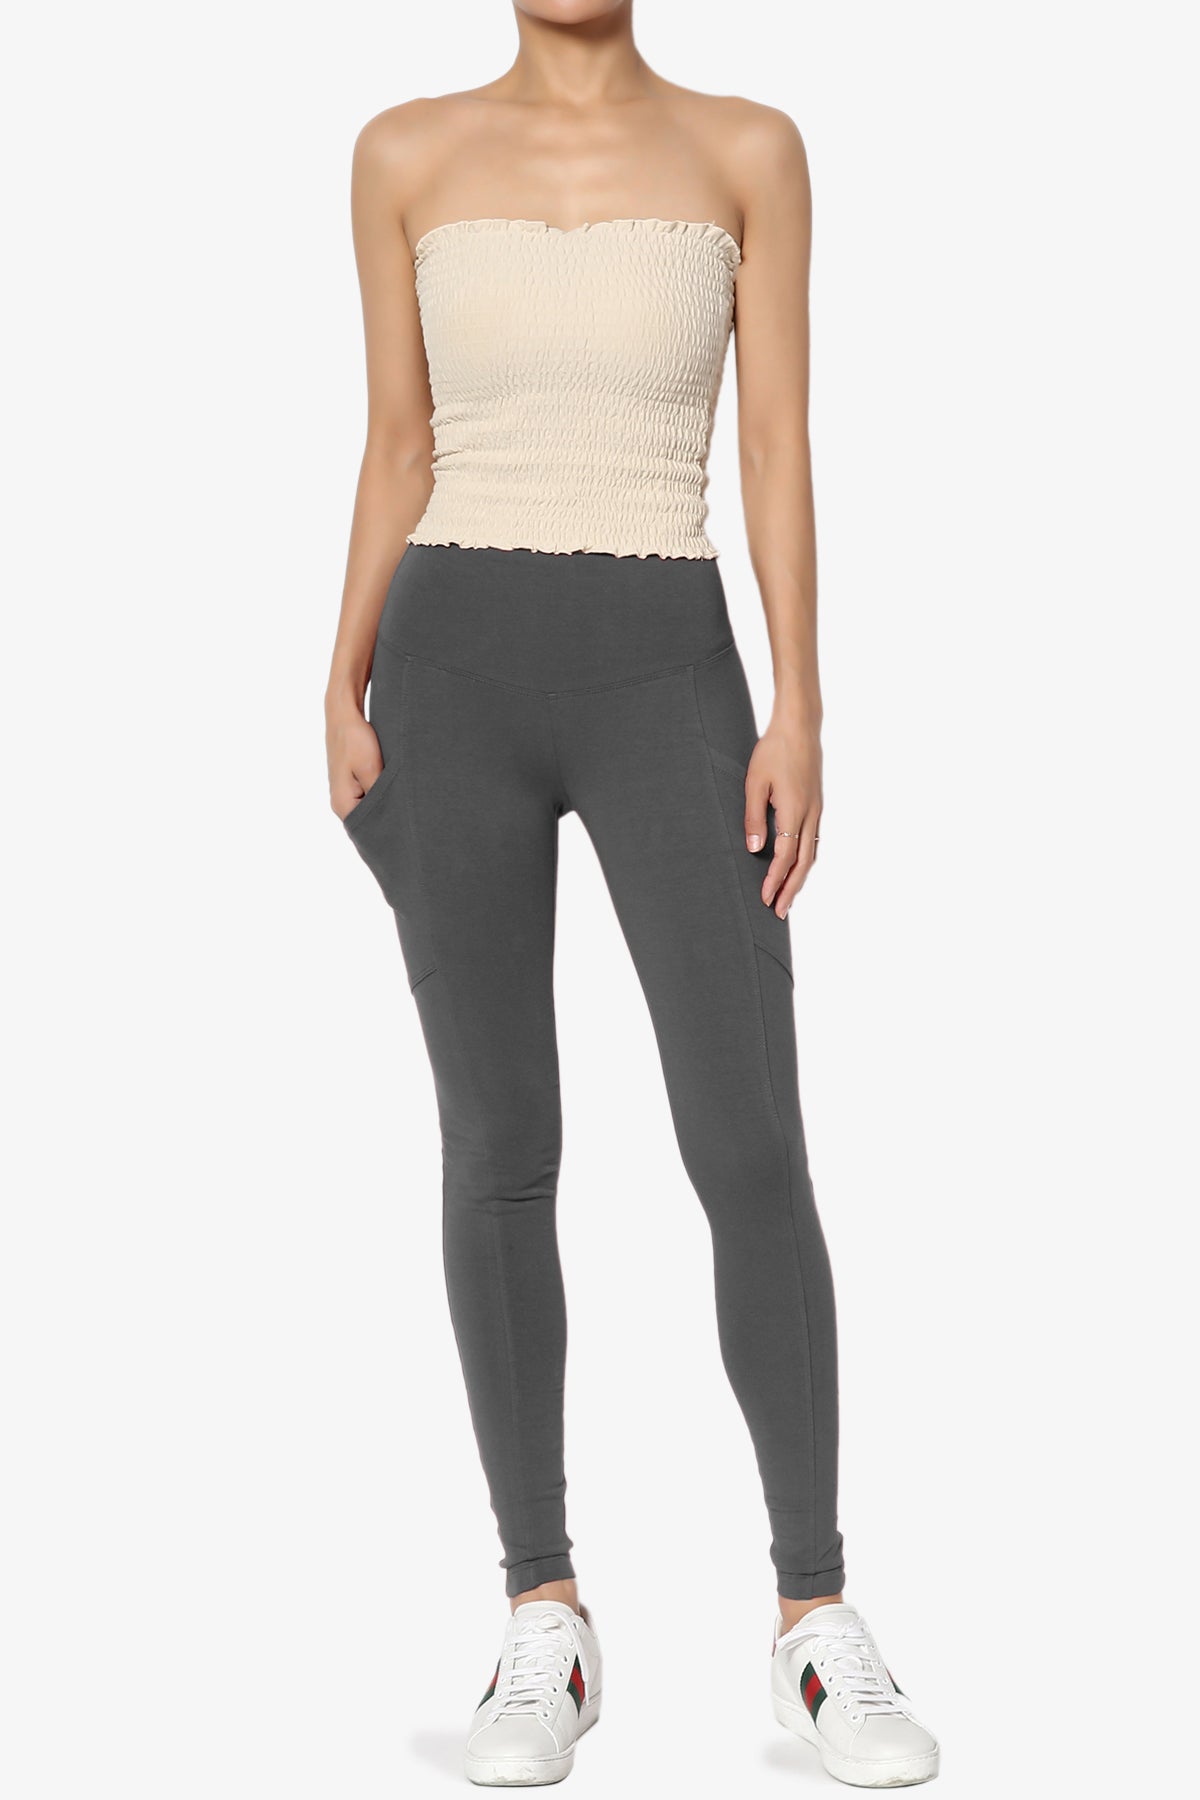 Ansley Luxe Cotton Leggings with Pockets ASH GREY_6